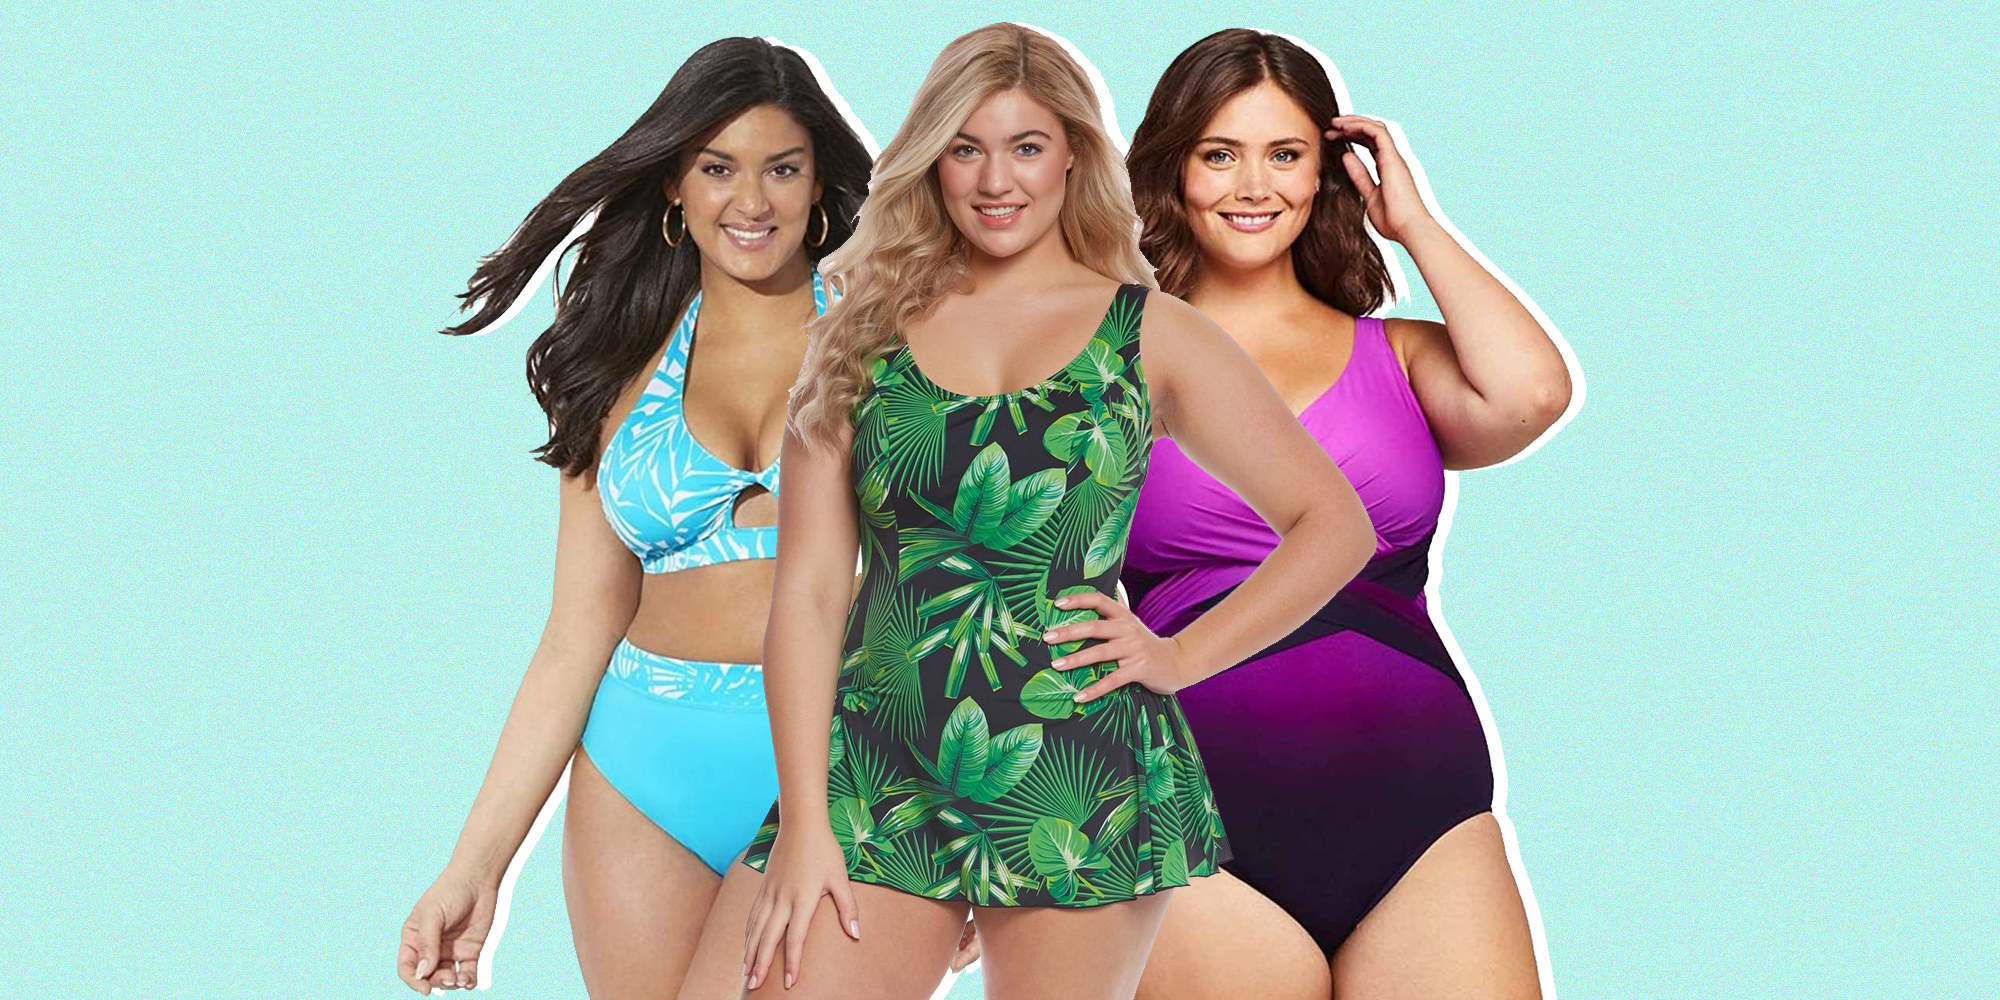 bathing suits with underwire support